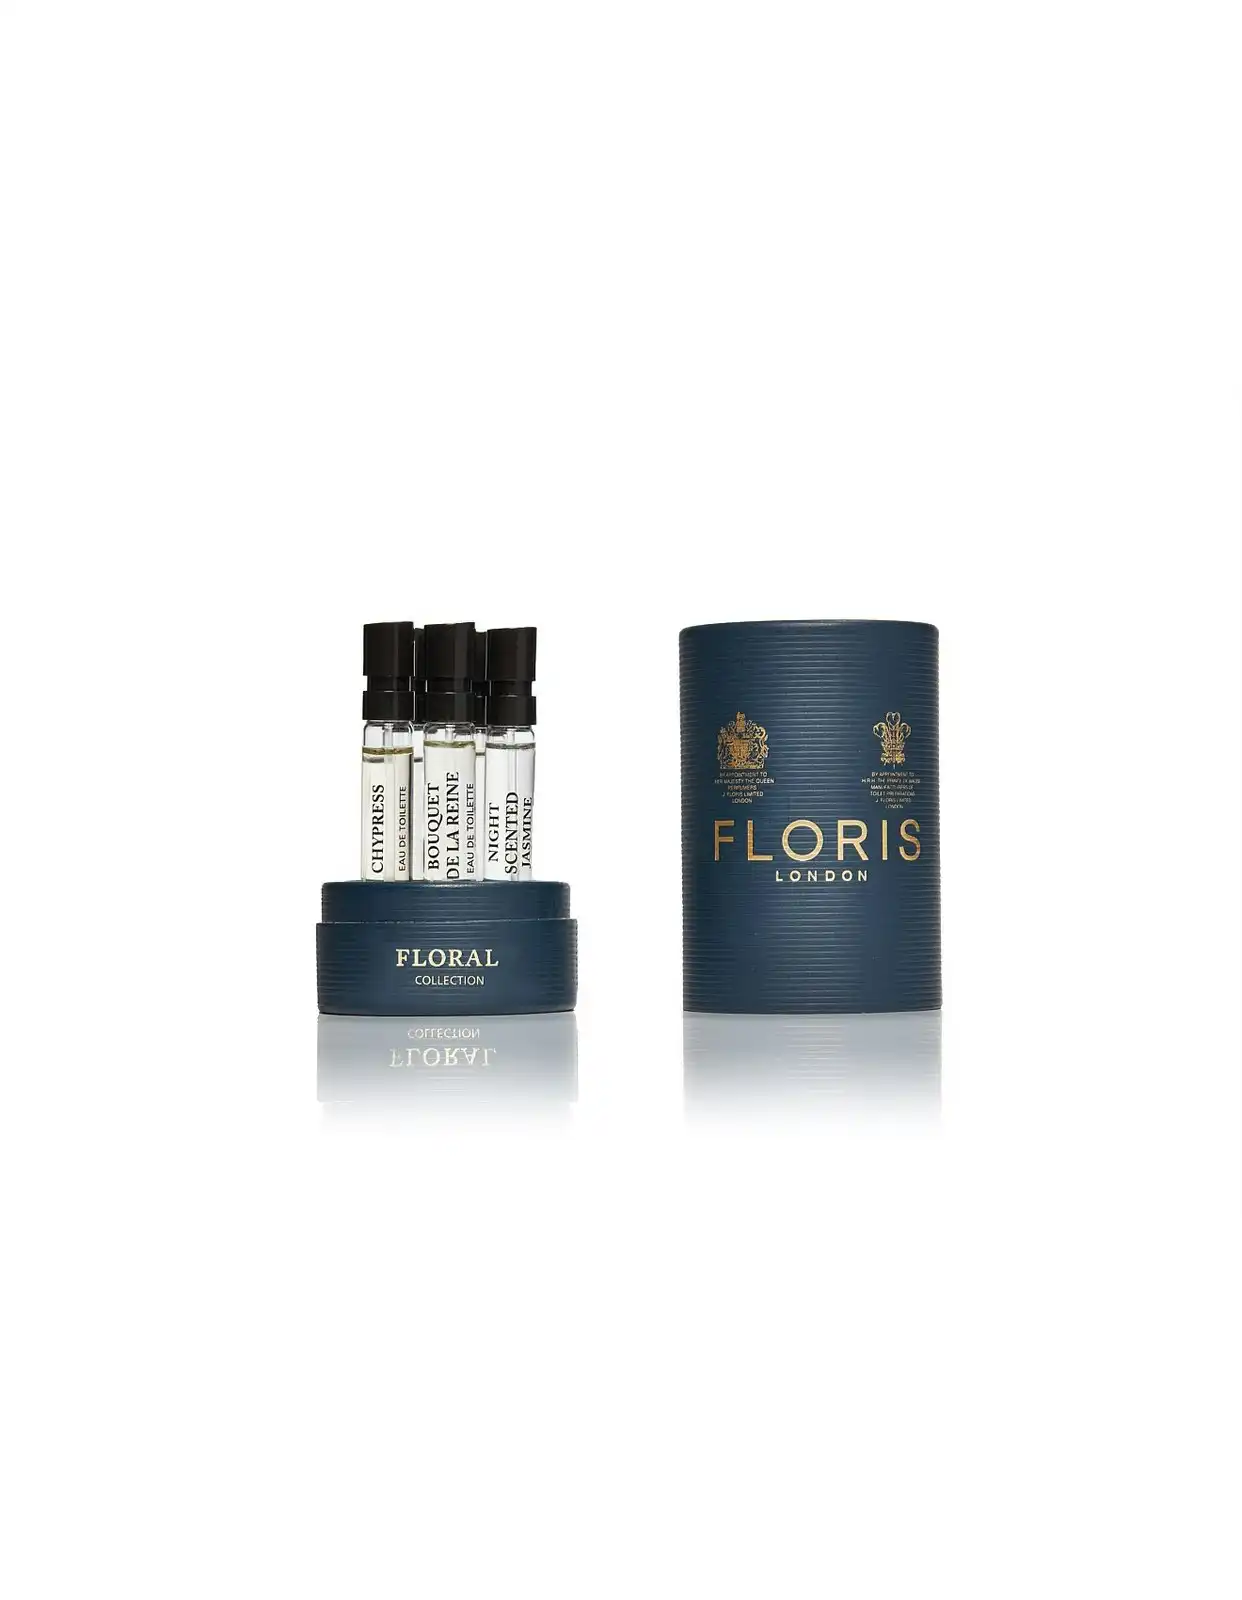 Floris Floral Discovery Collection 5 x 2ml